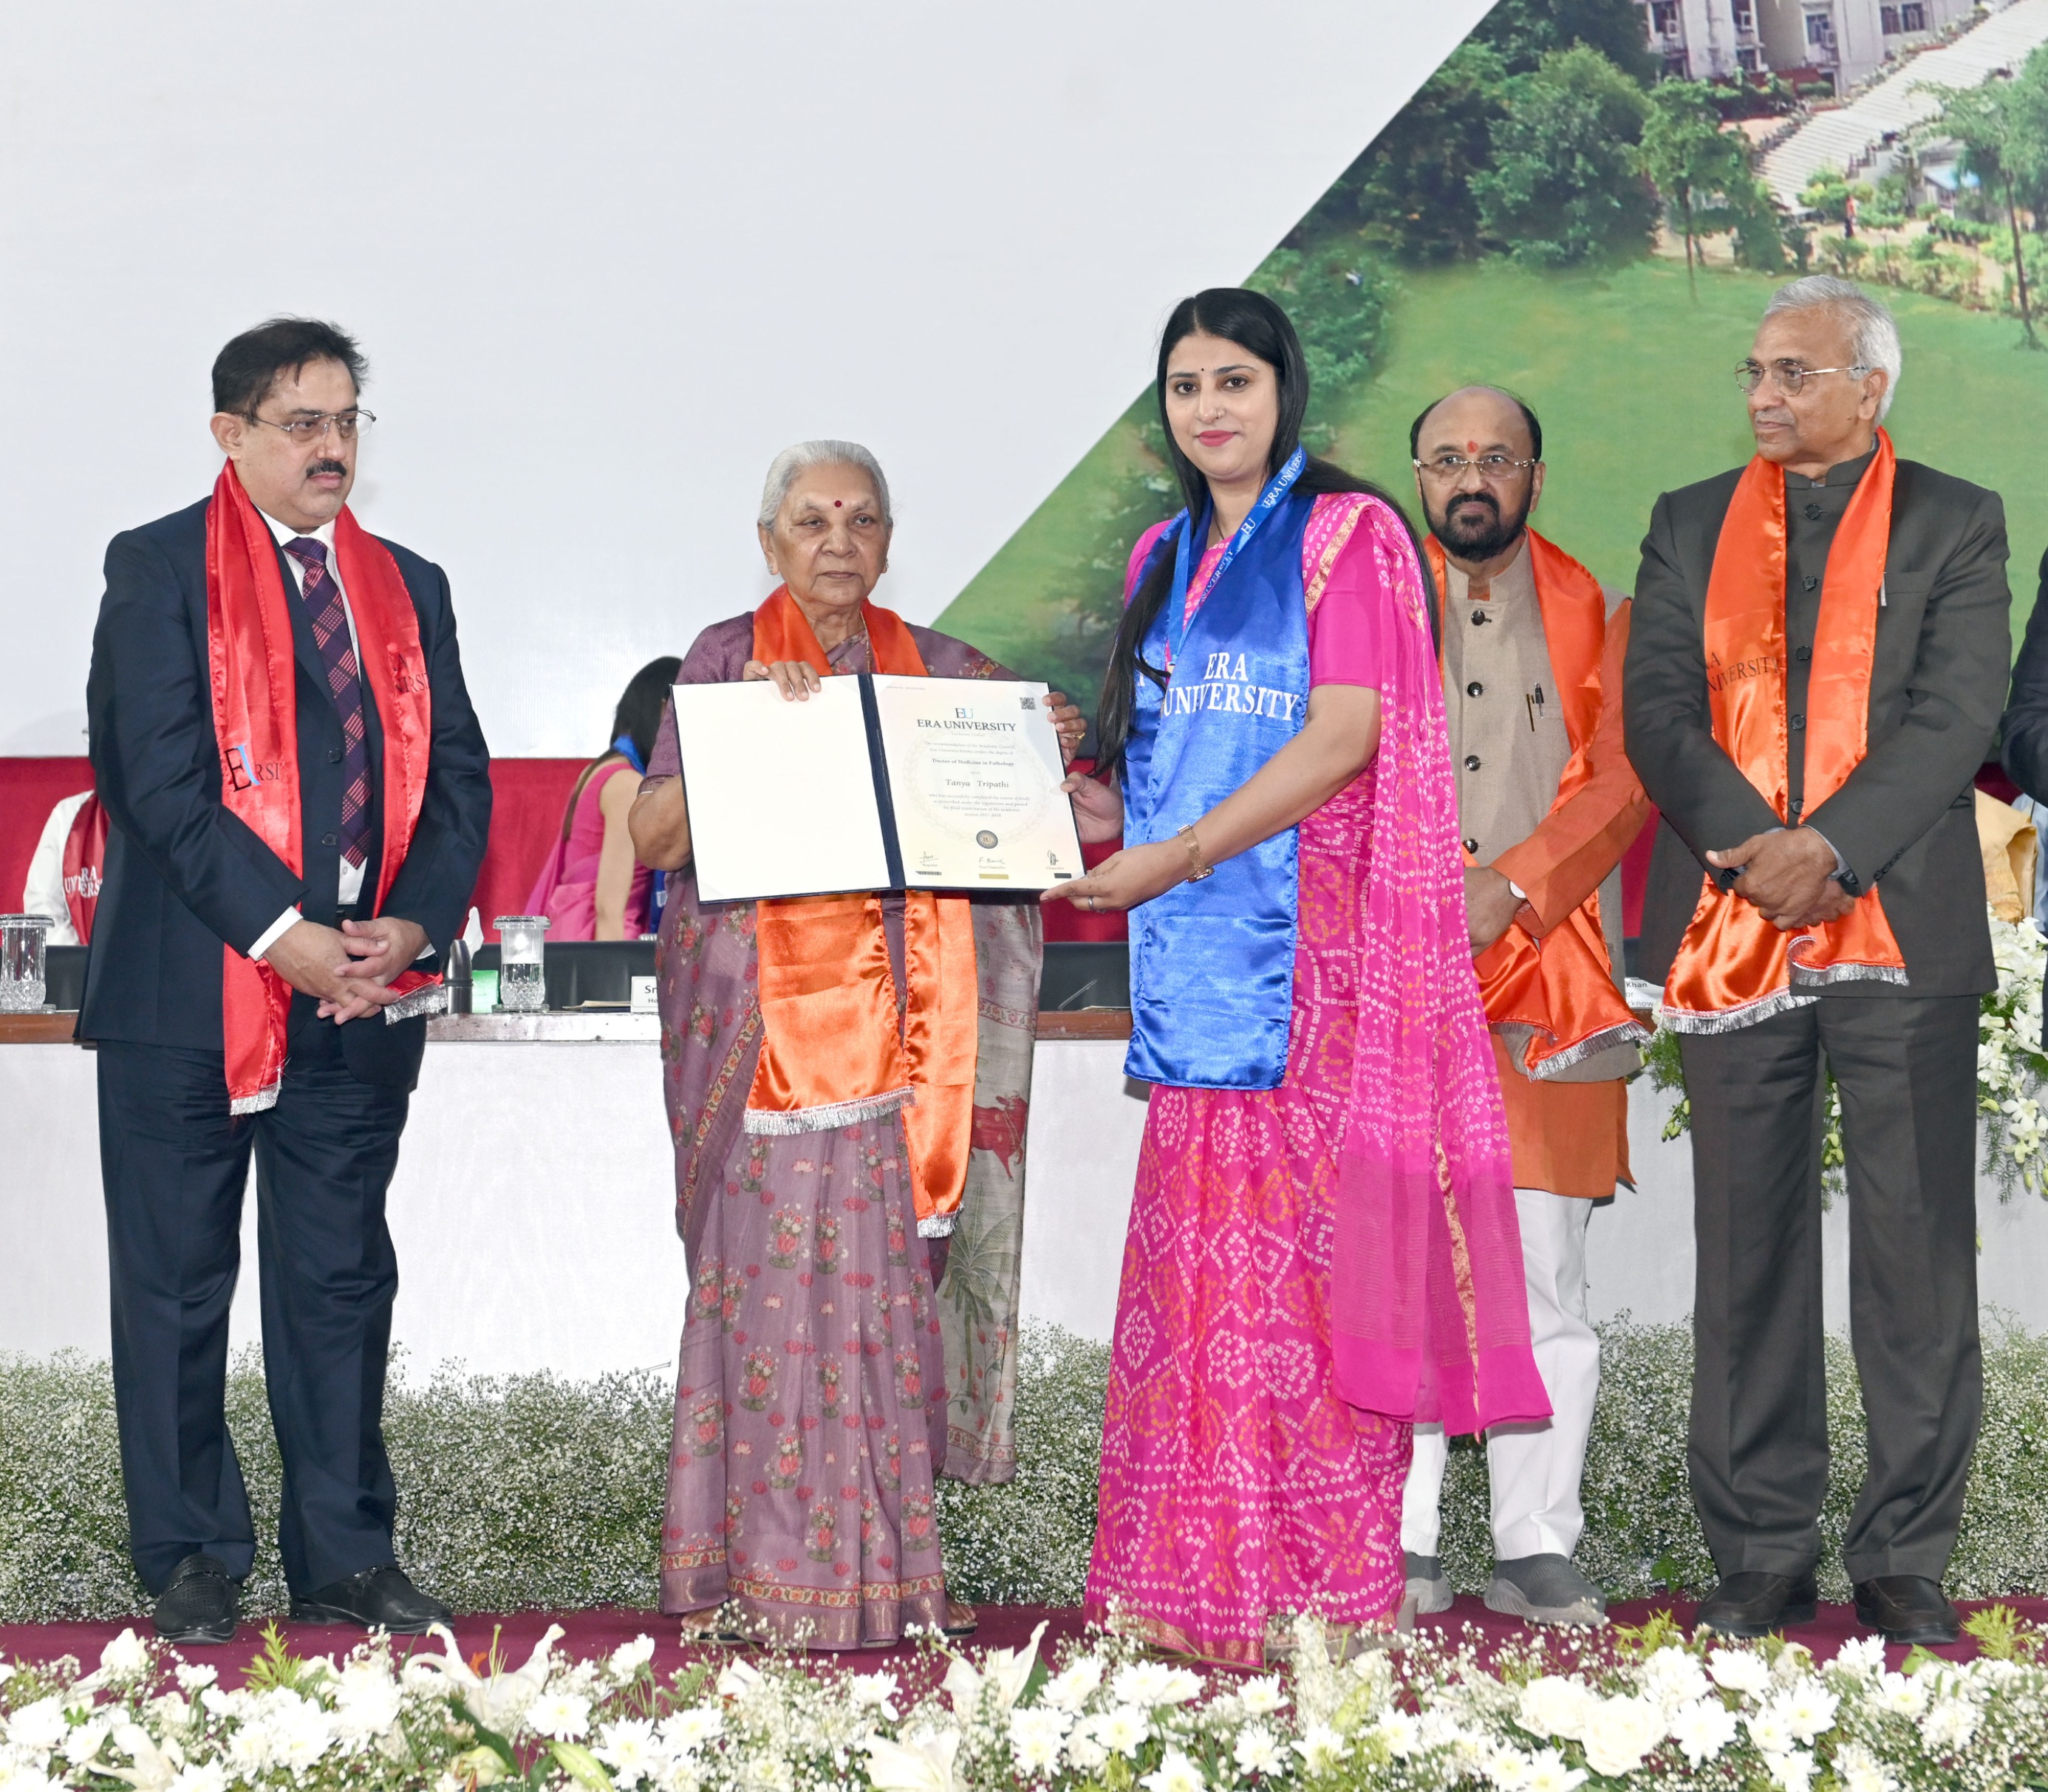 First convocation ceremony of Era University held in the presence of Governor, Smt. Anandiben Patel